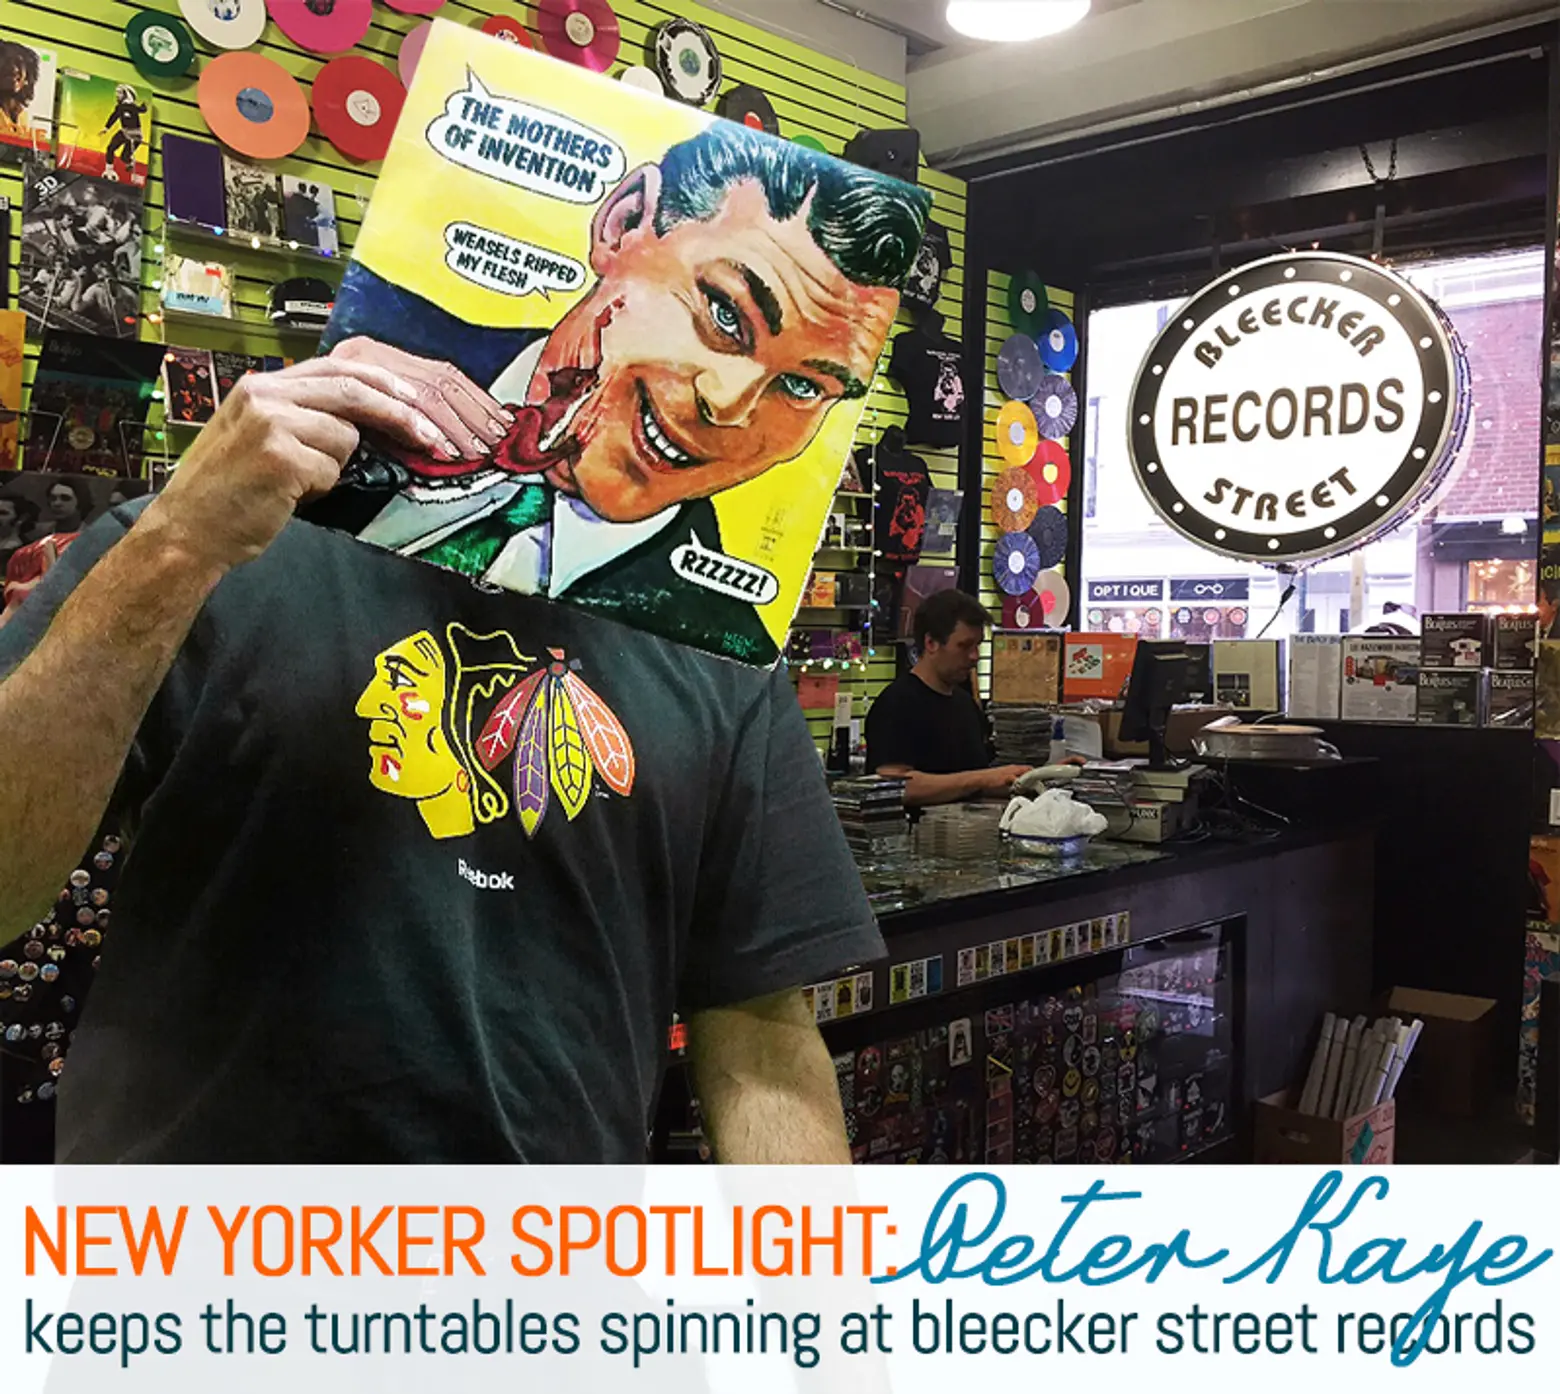 New Yorker Spotlight: Peter Kaye Keeps the Turntables Spinning at Bleecker Street Records